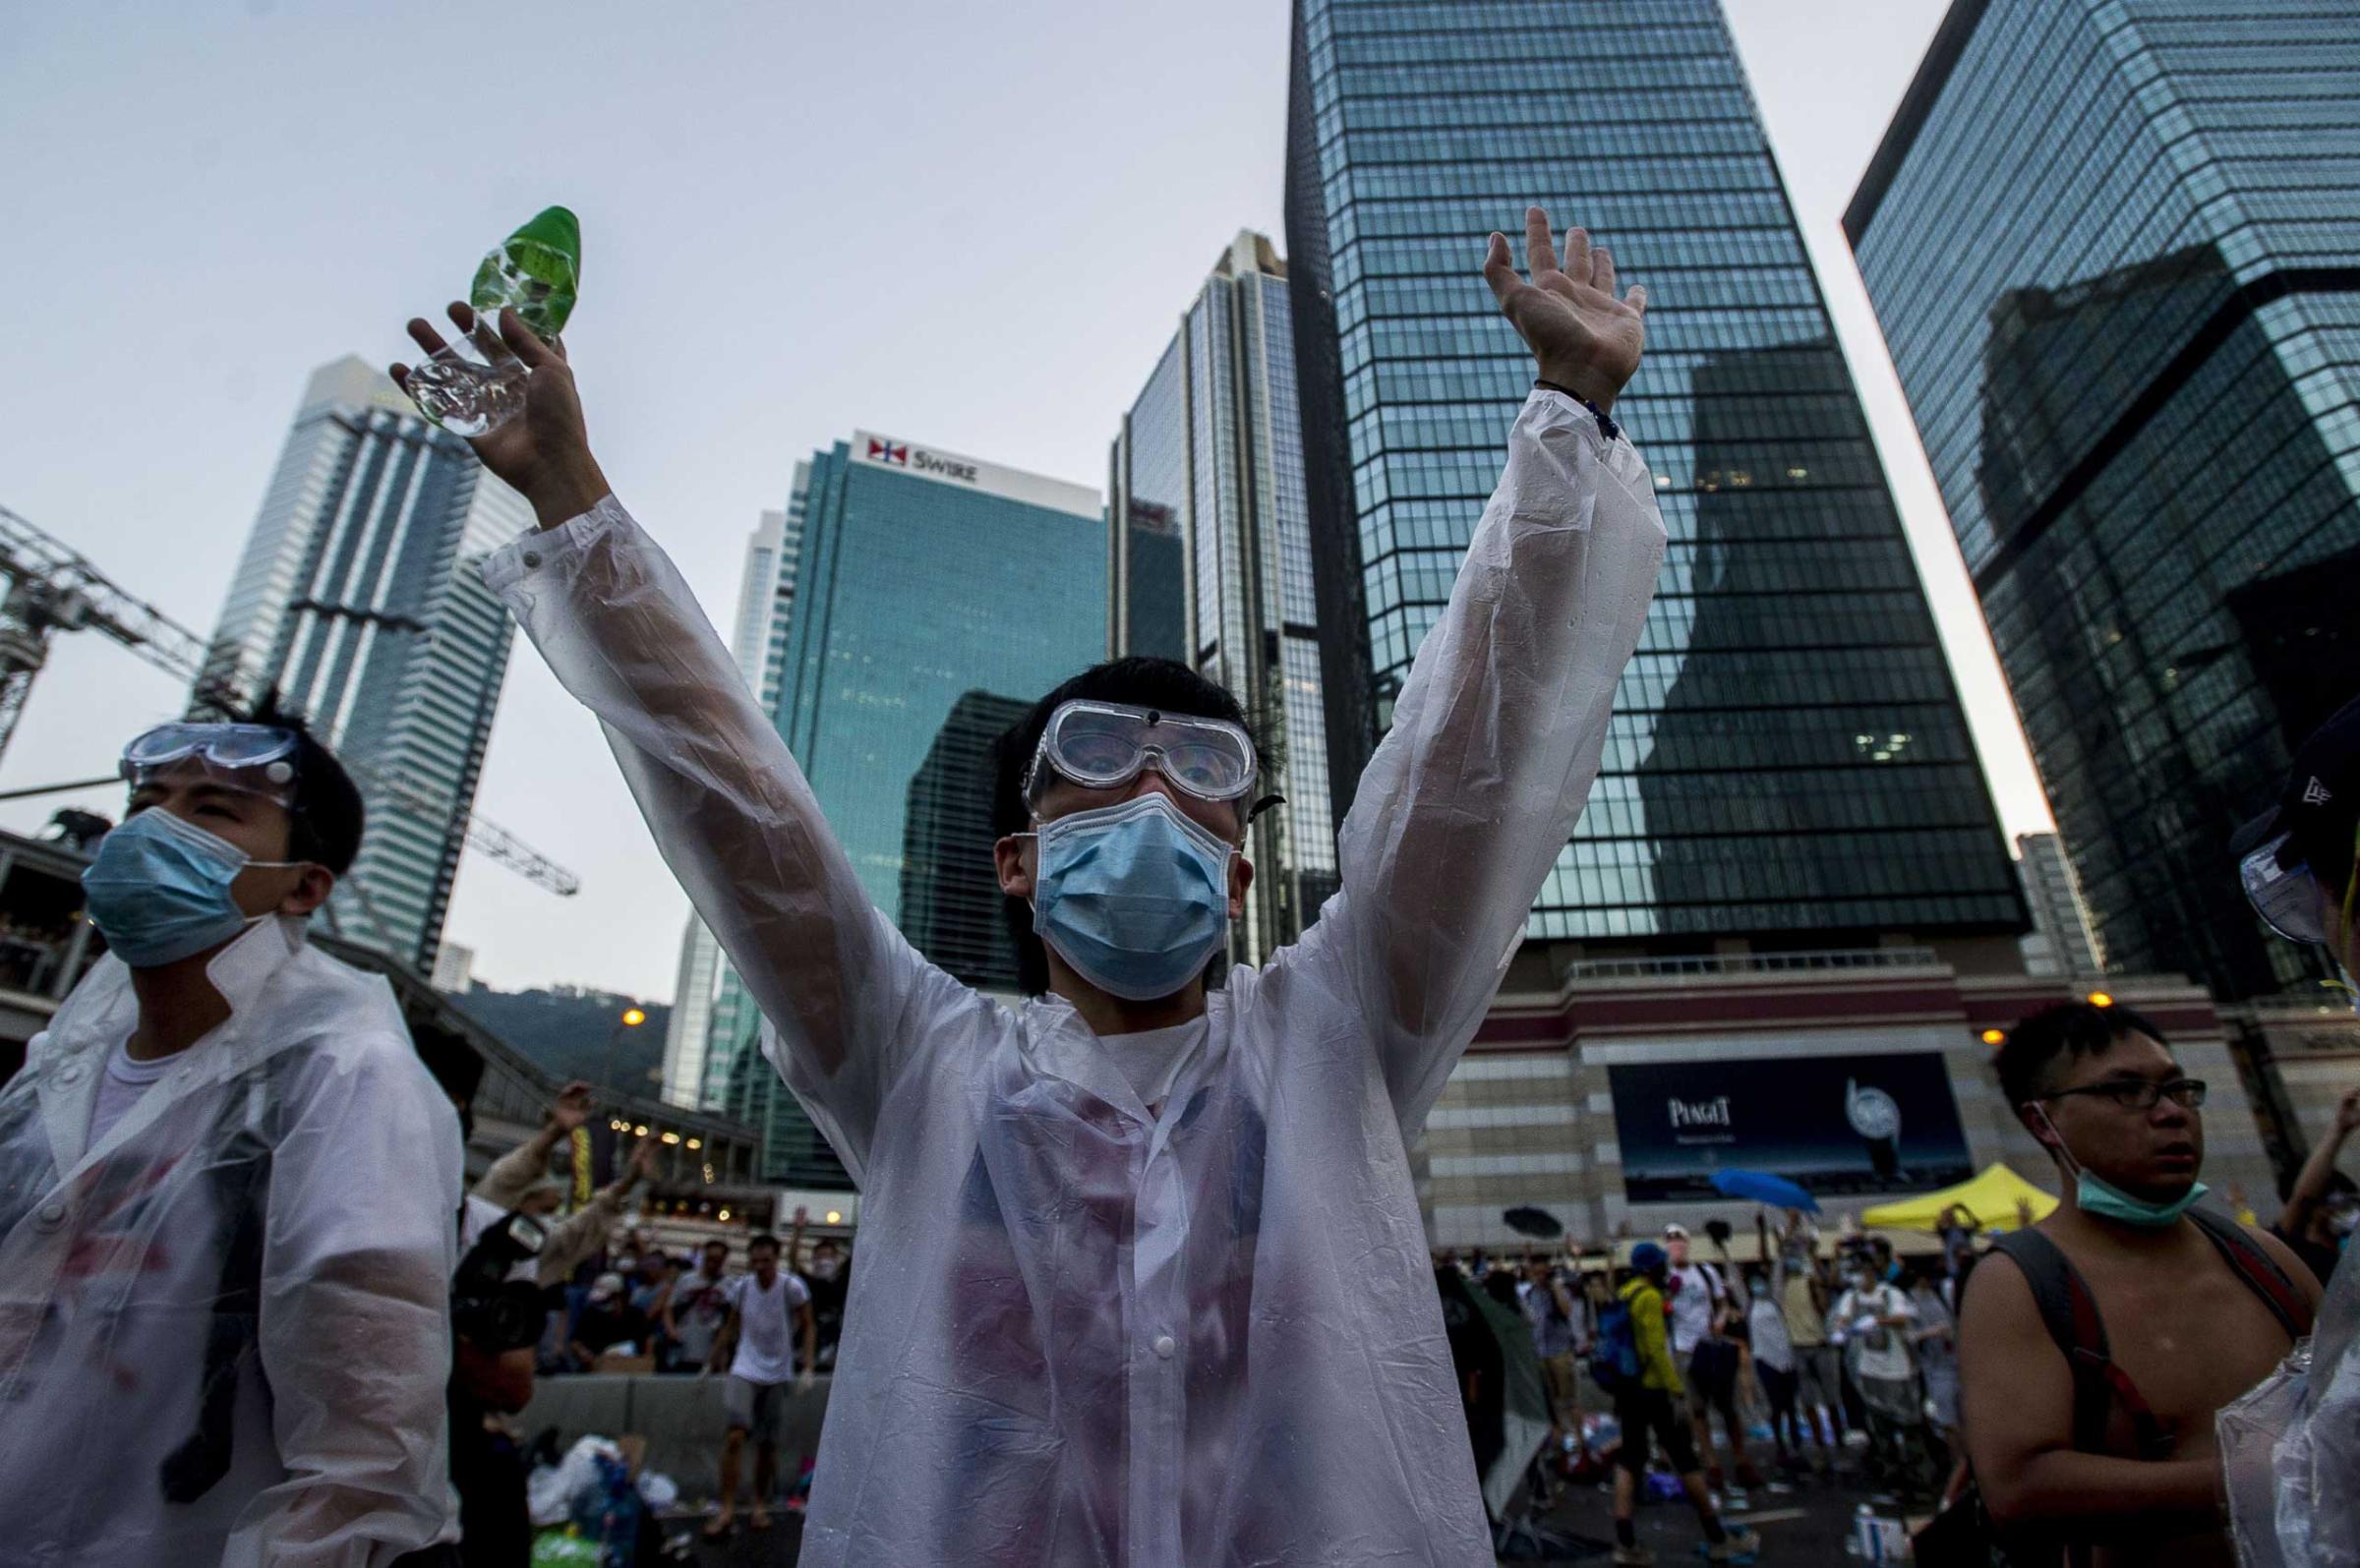 A pro-democracy demonstrator wearing a mask and goggles to protect against pepper spray and tear gas gestures during a rally near the Hong Kong government headquarters on Sept. 28, 2014.